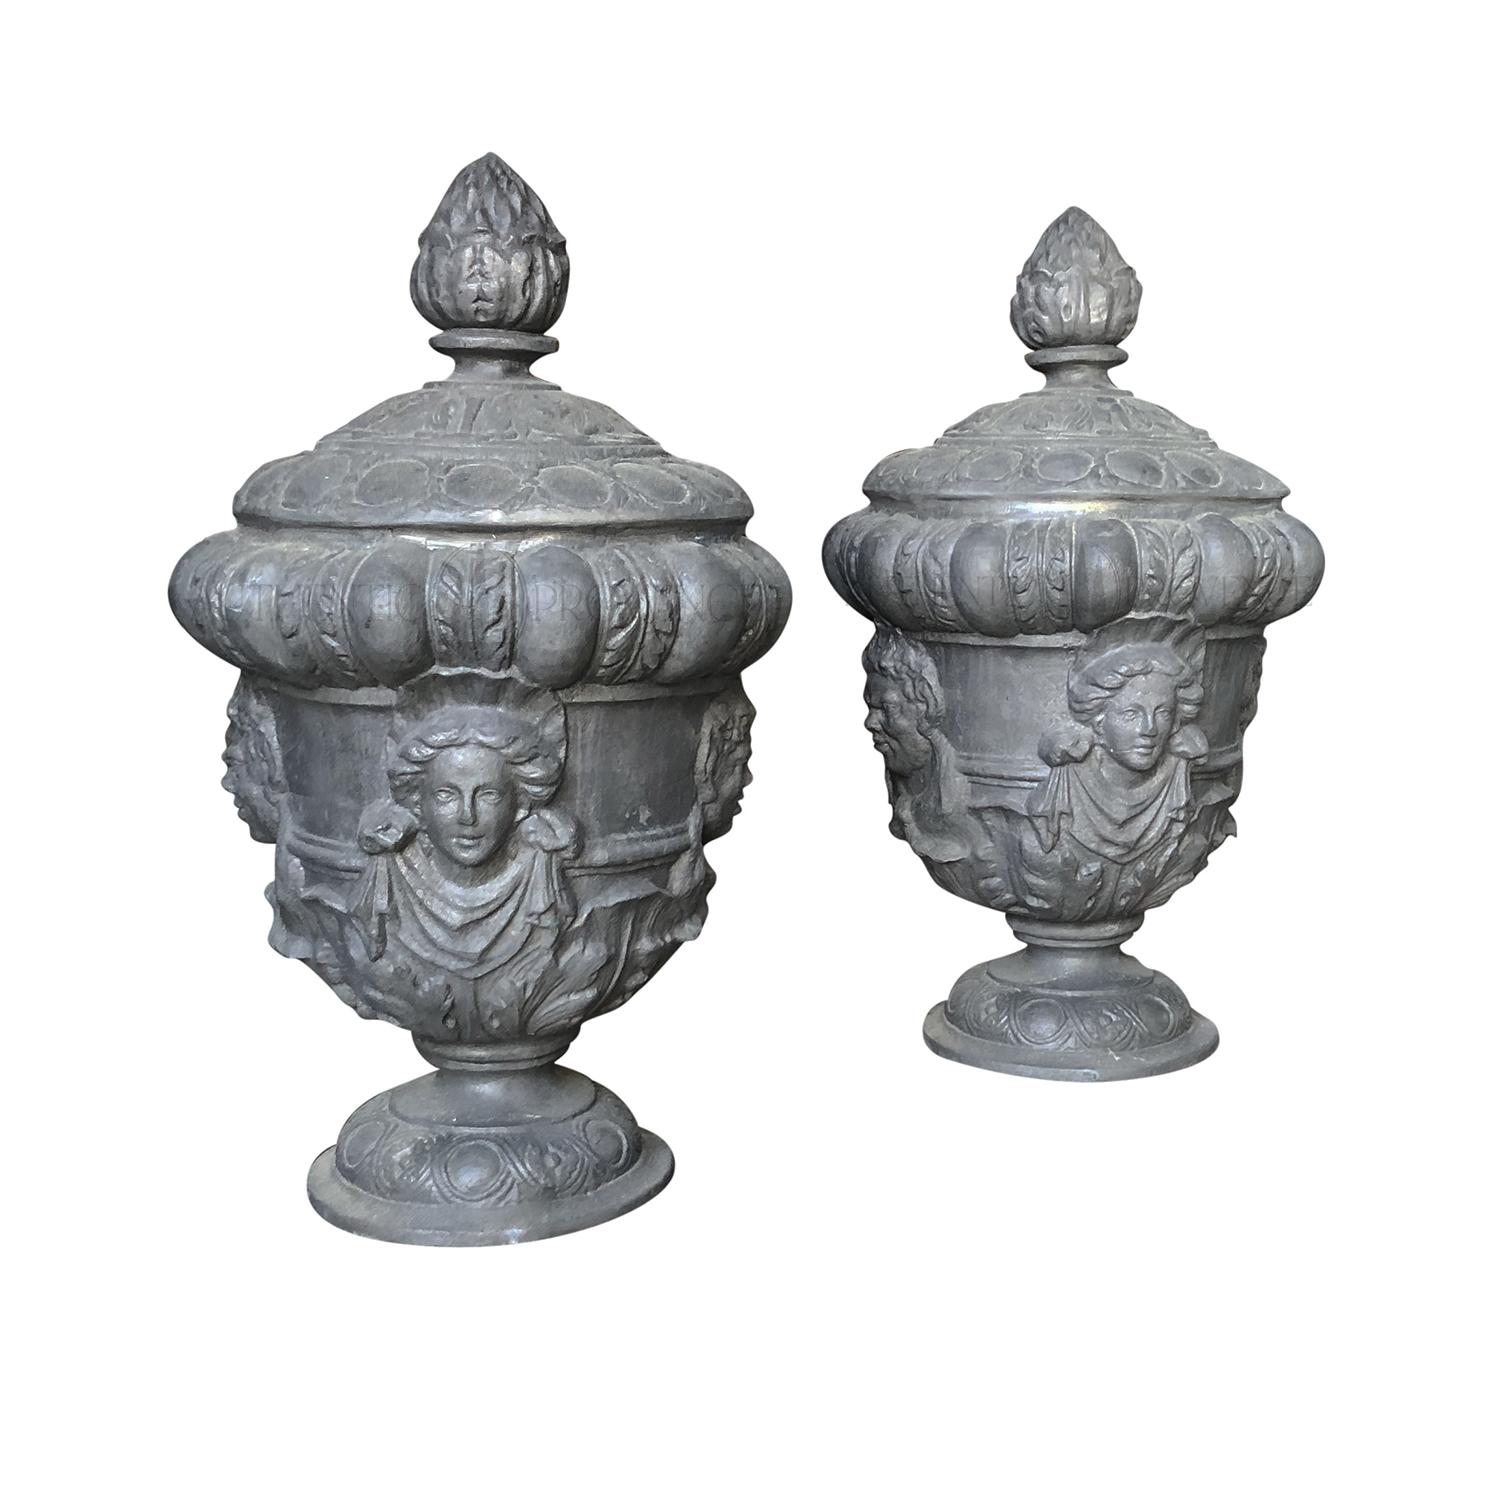 Hand-Crafted 20th Century Grey English Pair of Lead Queen Anne Finials, Vintage Garden Urns For Sale